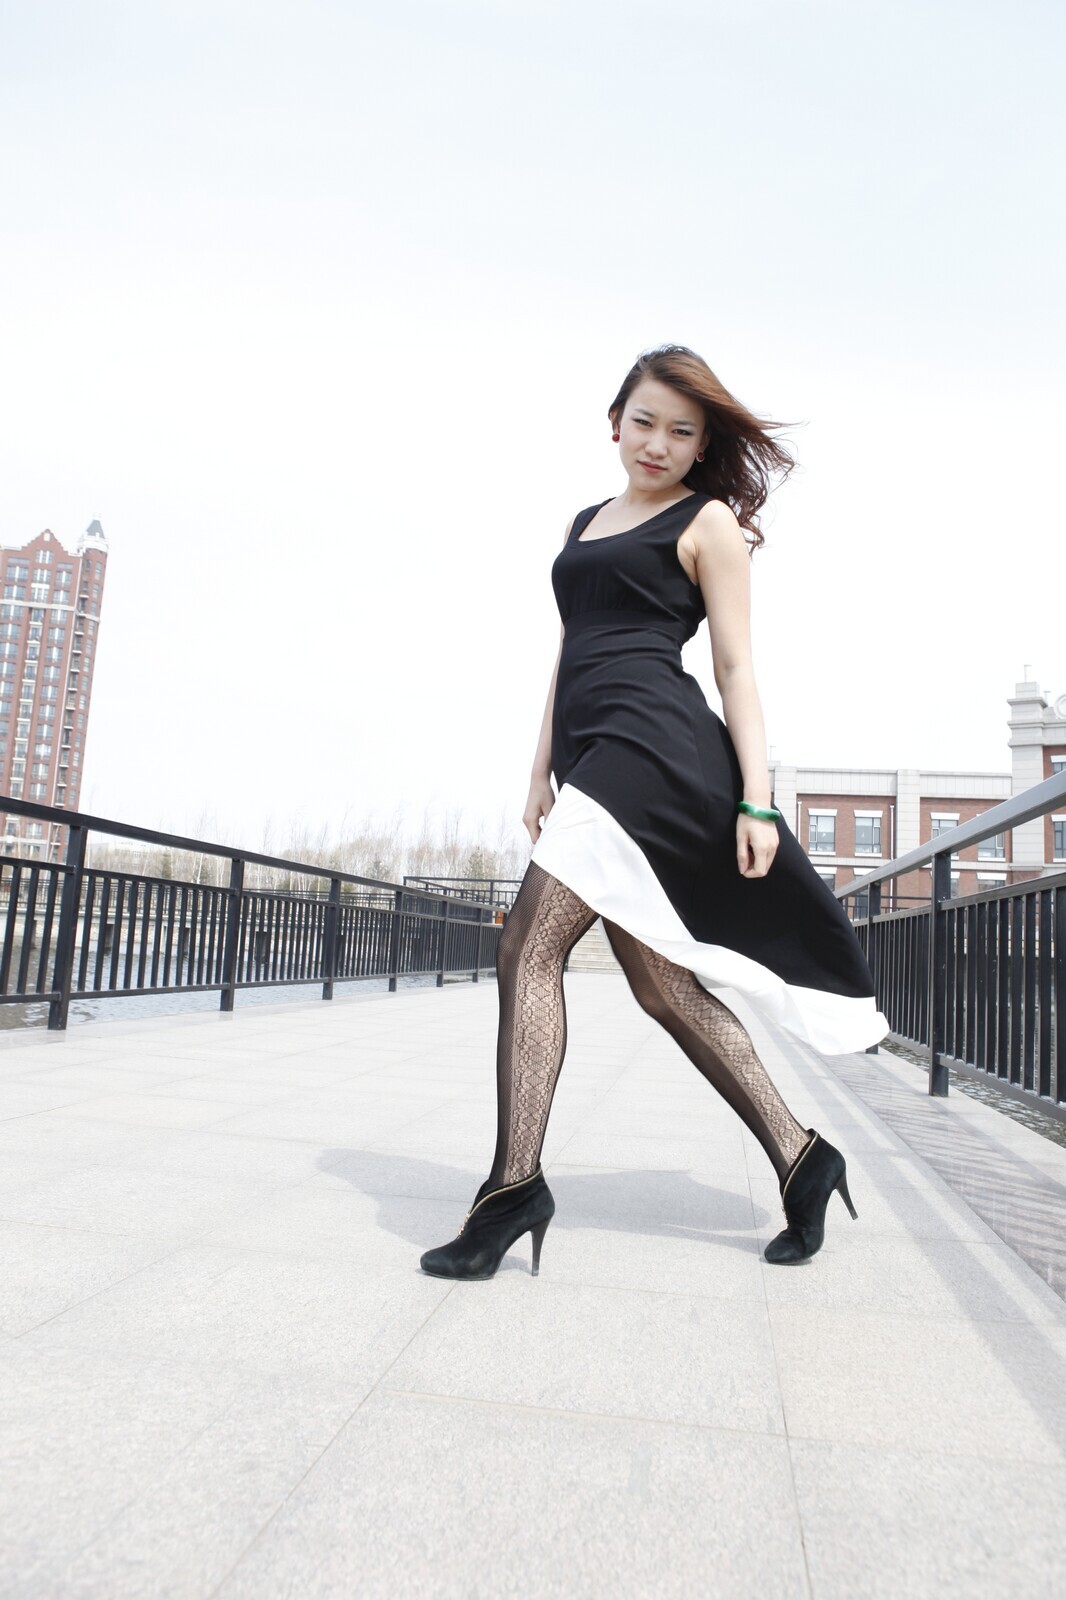 [online collection] on December 8, 2013, black skirt pattern silk stockings were enchanting and sexy